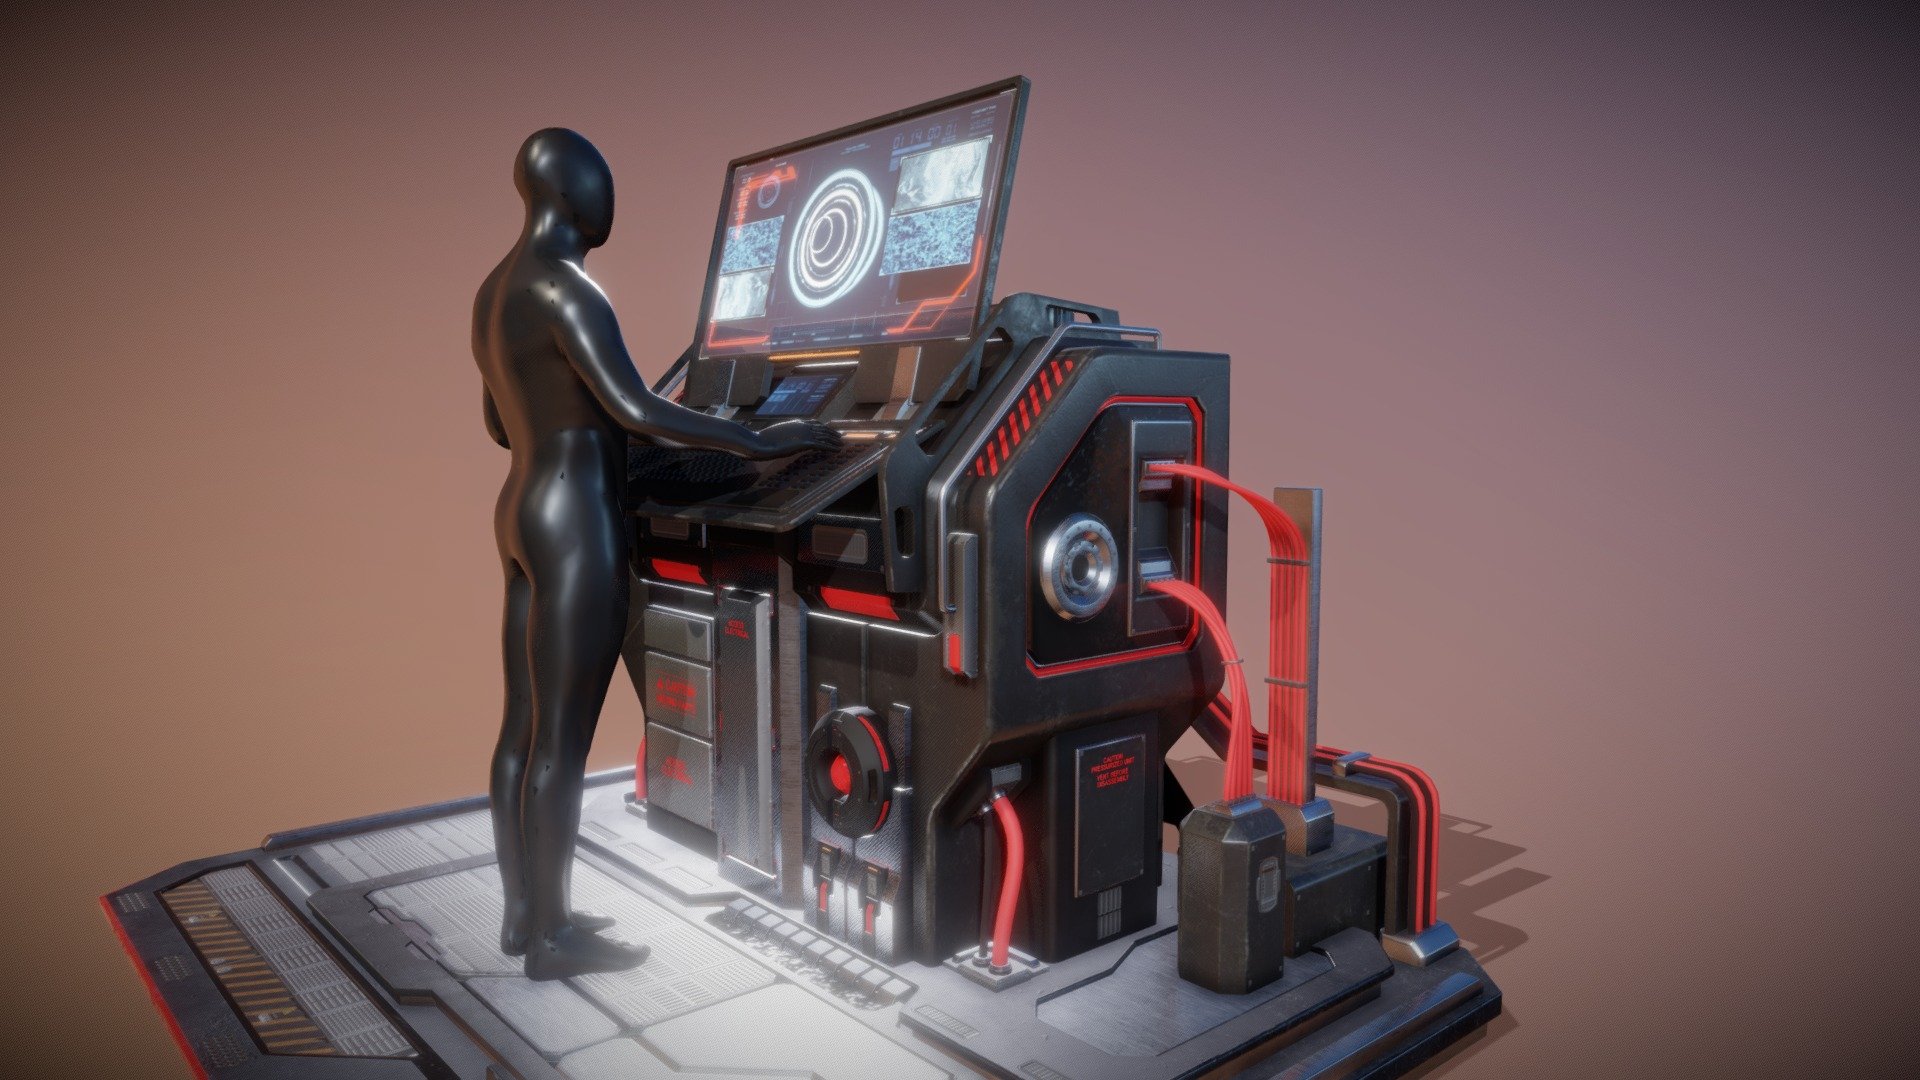 Sci fi computer work station - 3D model by Dhieen (@Dhieen) [2486244